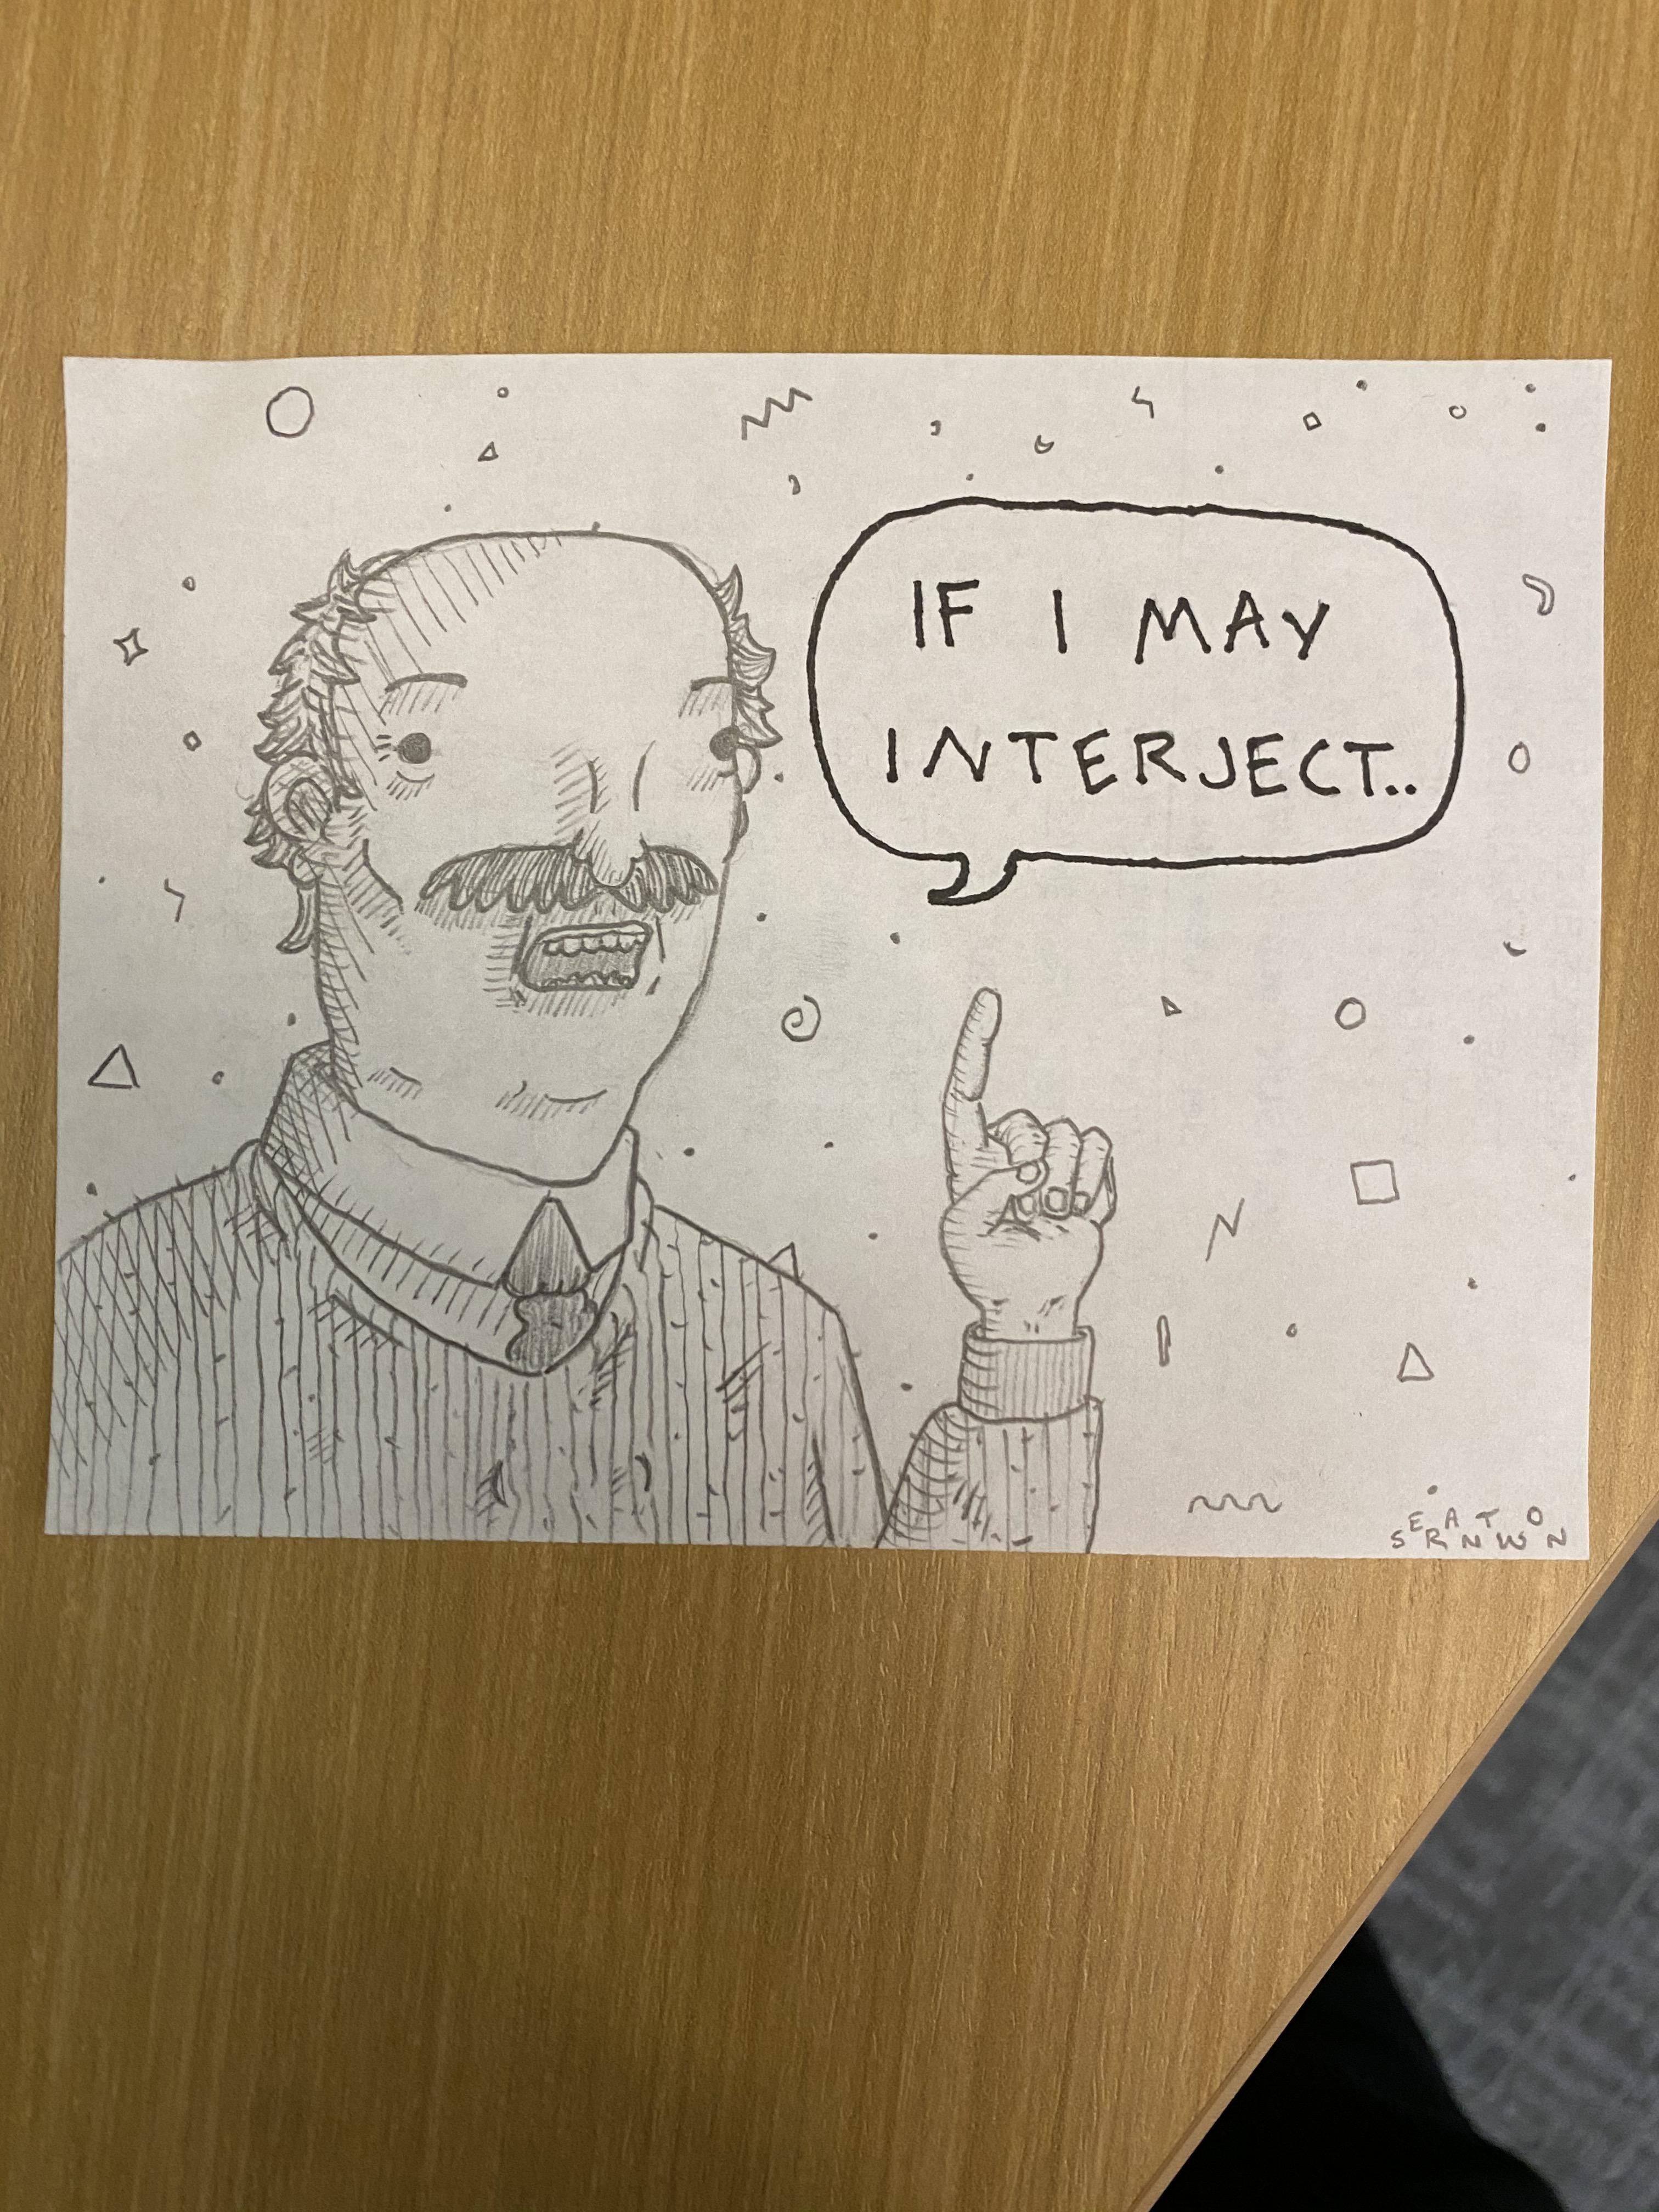 I work at a call center. Sometimes I like to draw what my callers might look like. Here’s Richard from today, who liked to interrupt his wife to answer every question I asked.